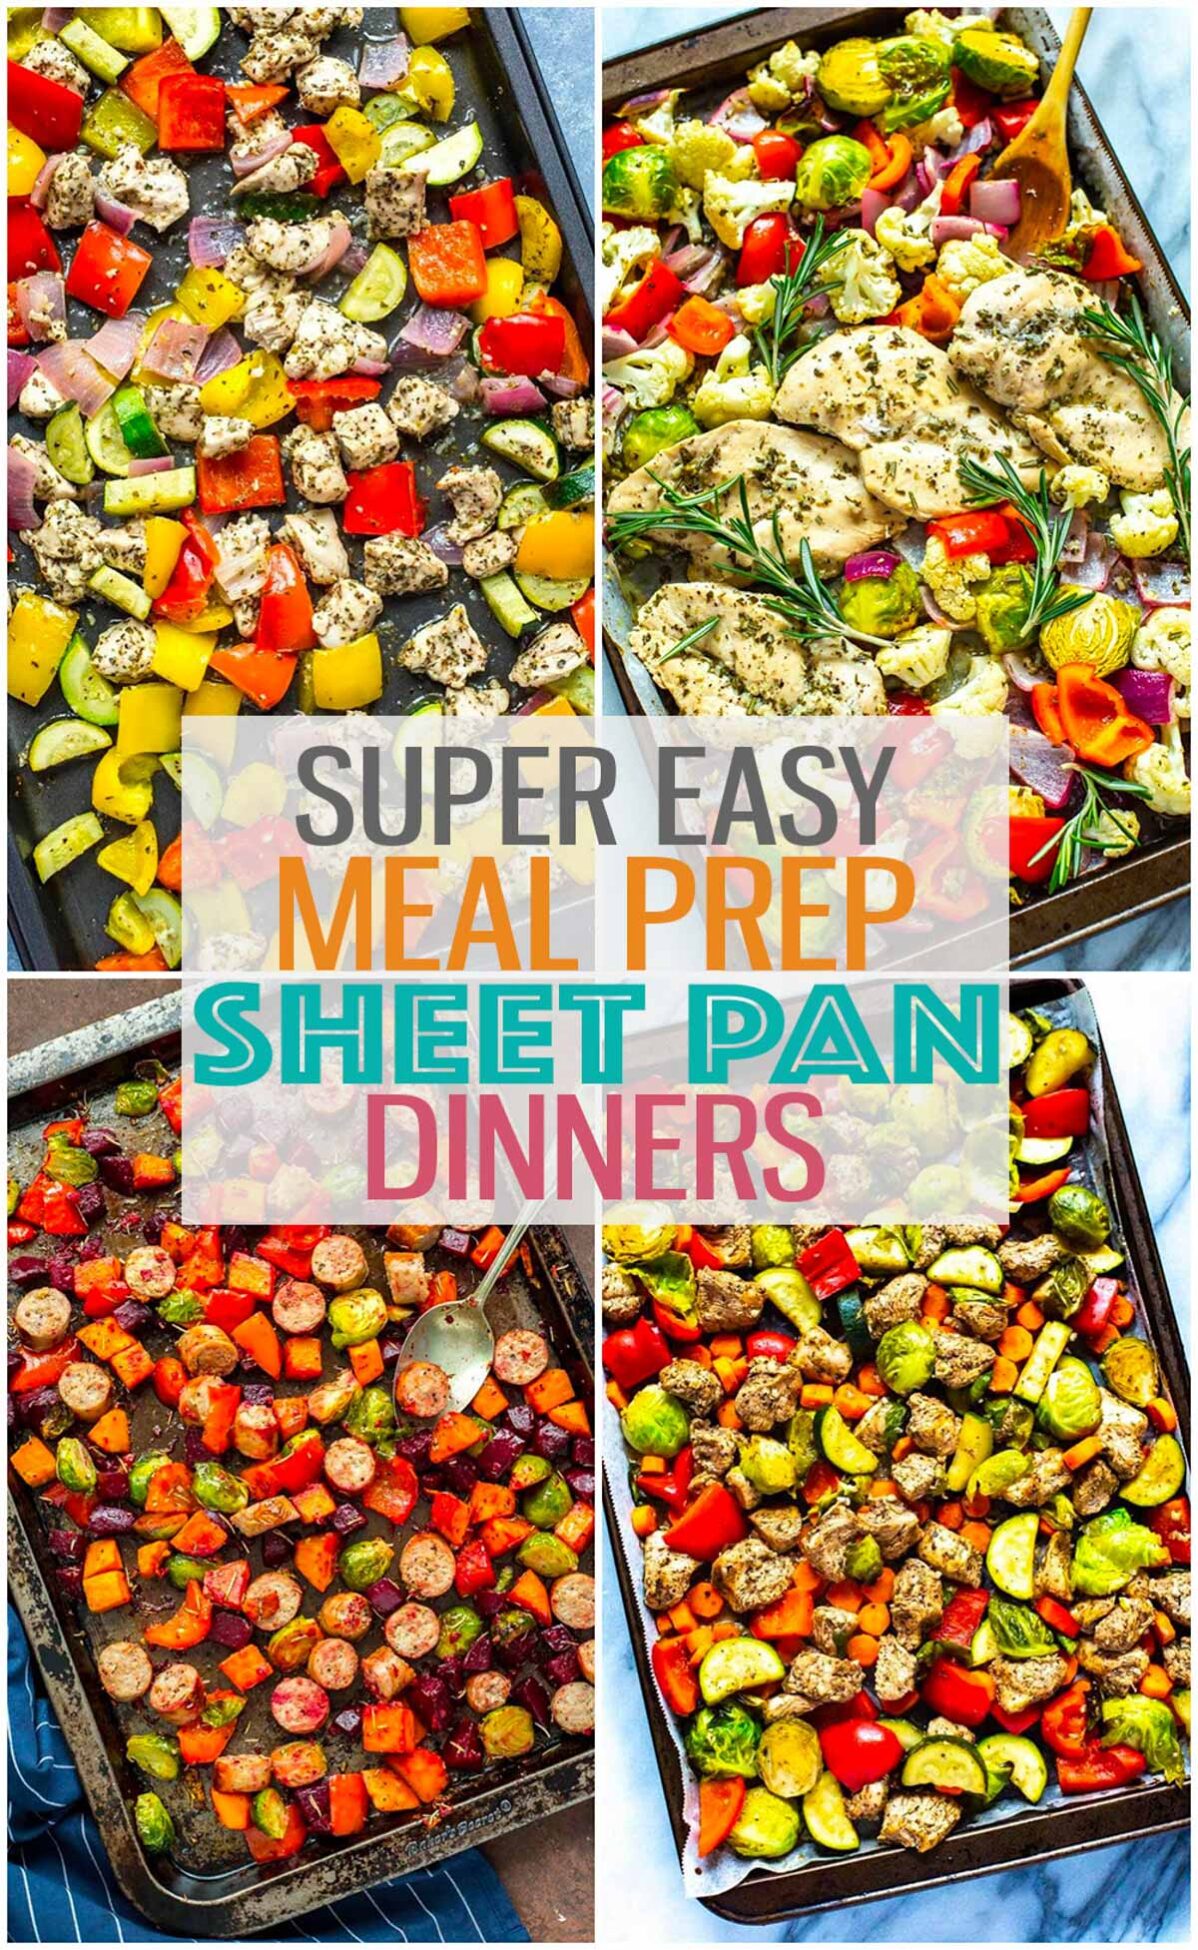 A collage of four different sheet pan dinner recipes with the text "Super Easy Meal Prep Sheet Pan Dinners" layered over top.